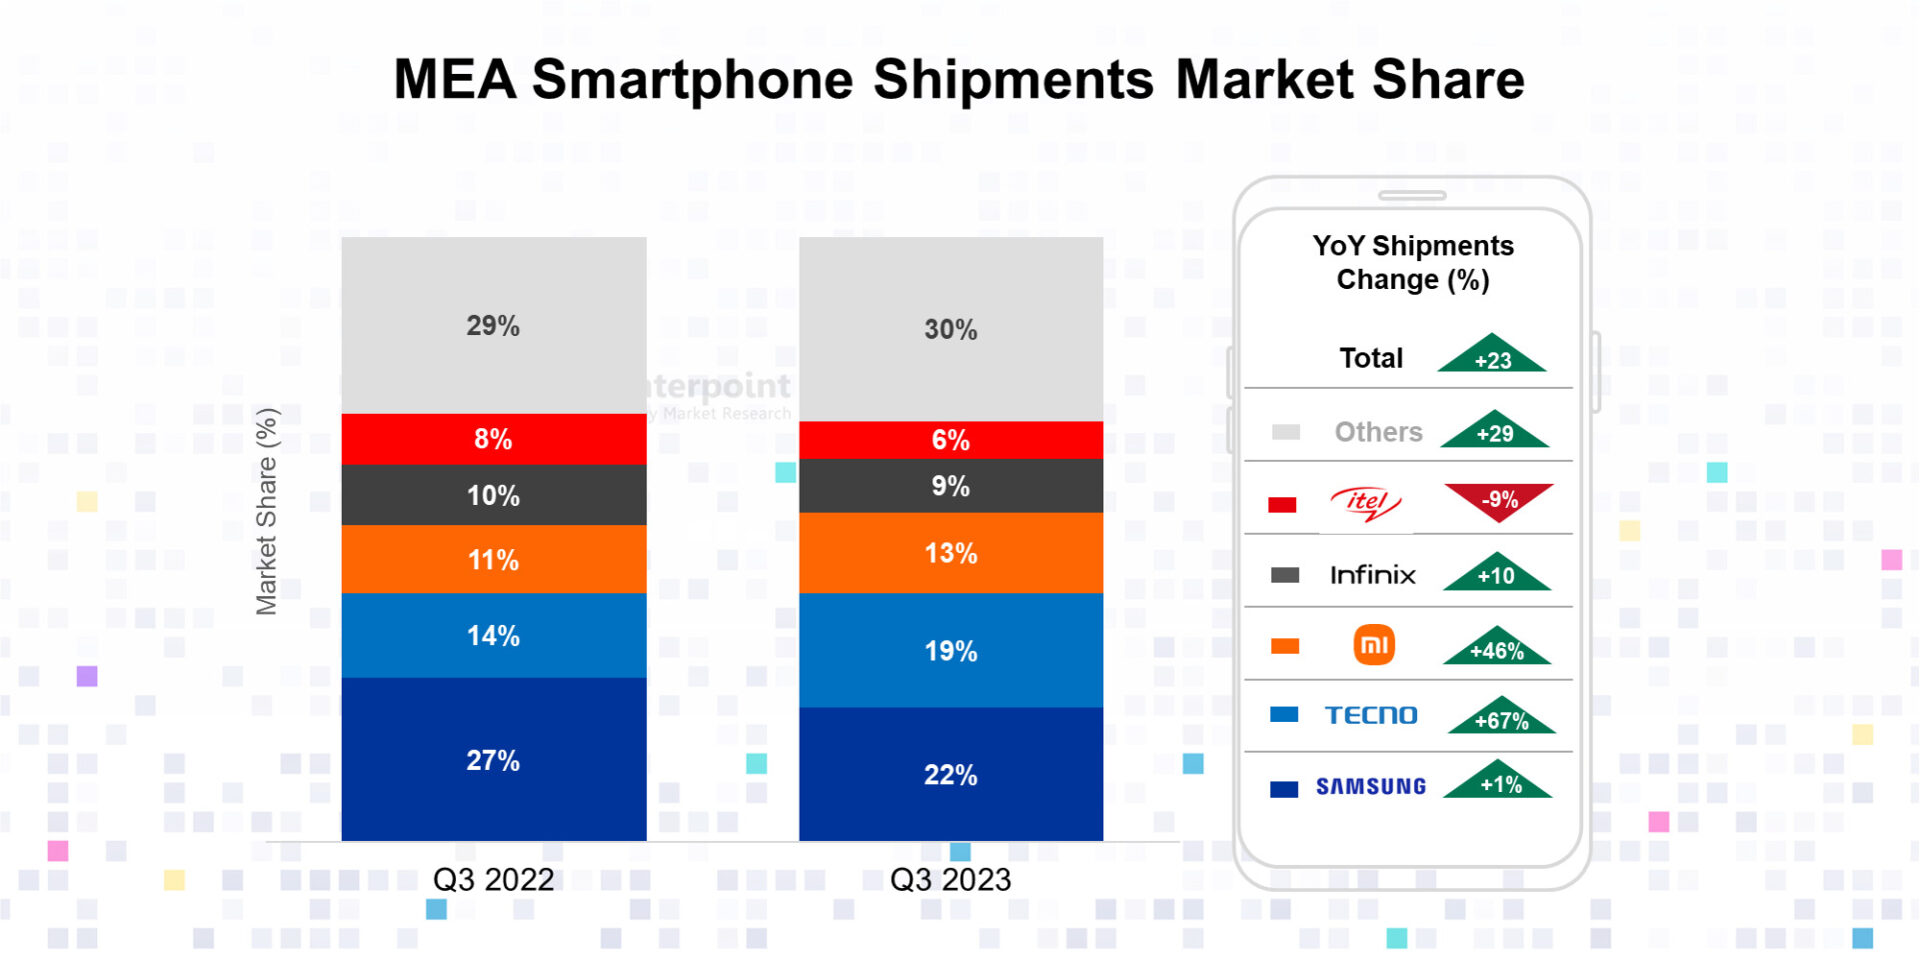 MEA Smartphone Shipments Grow Fastest Among All Regions in Q3